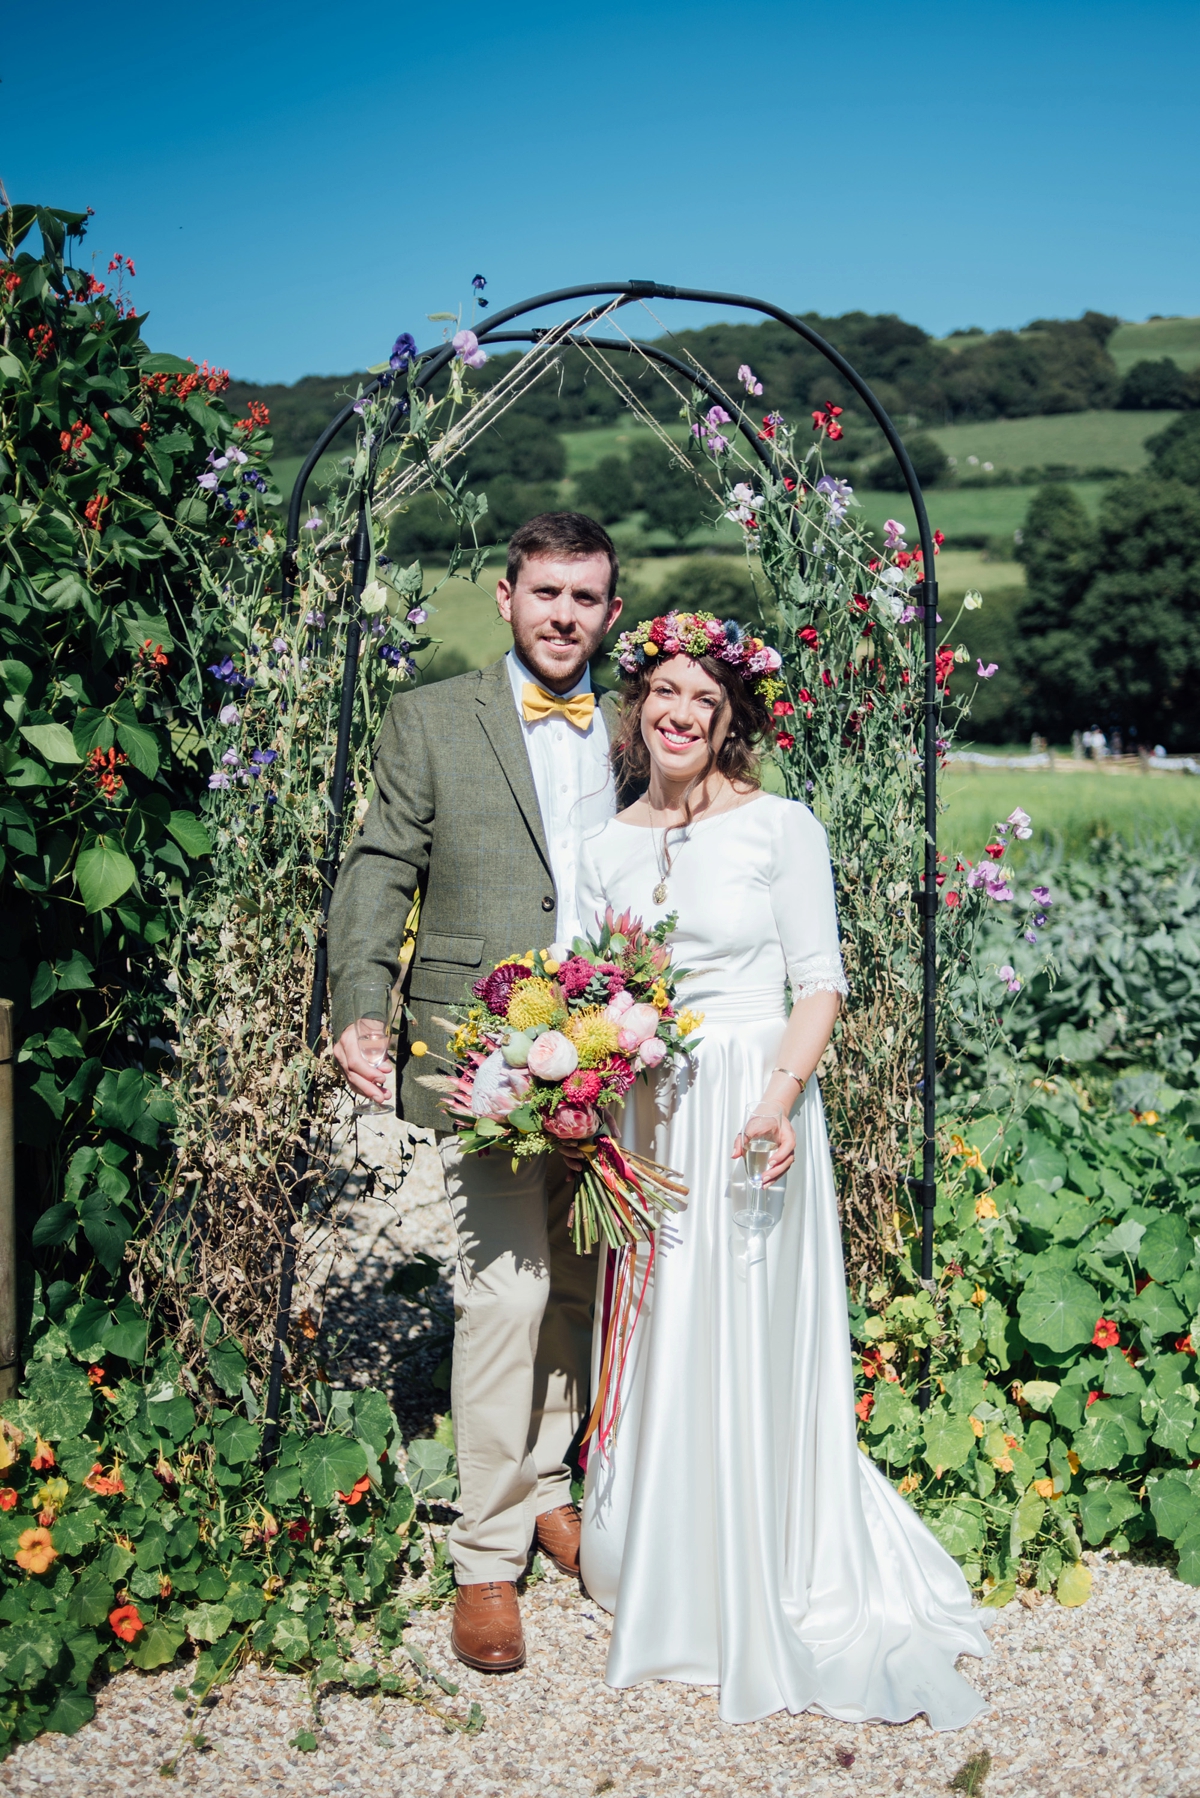 31 A handmade and natural outdoor wedding in Devon